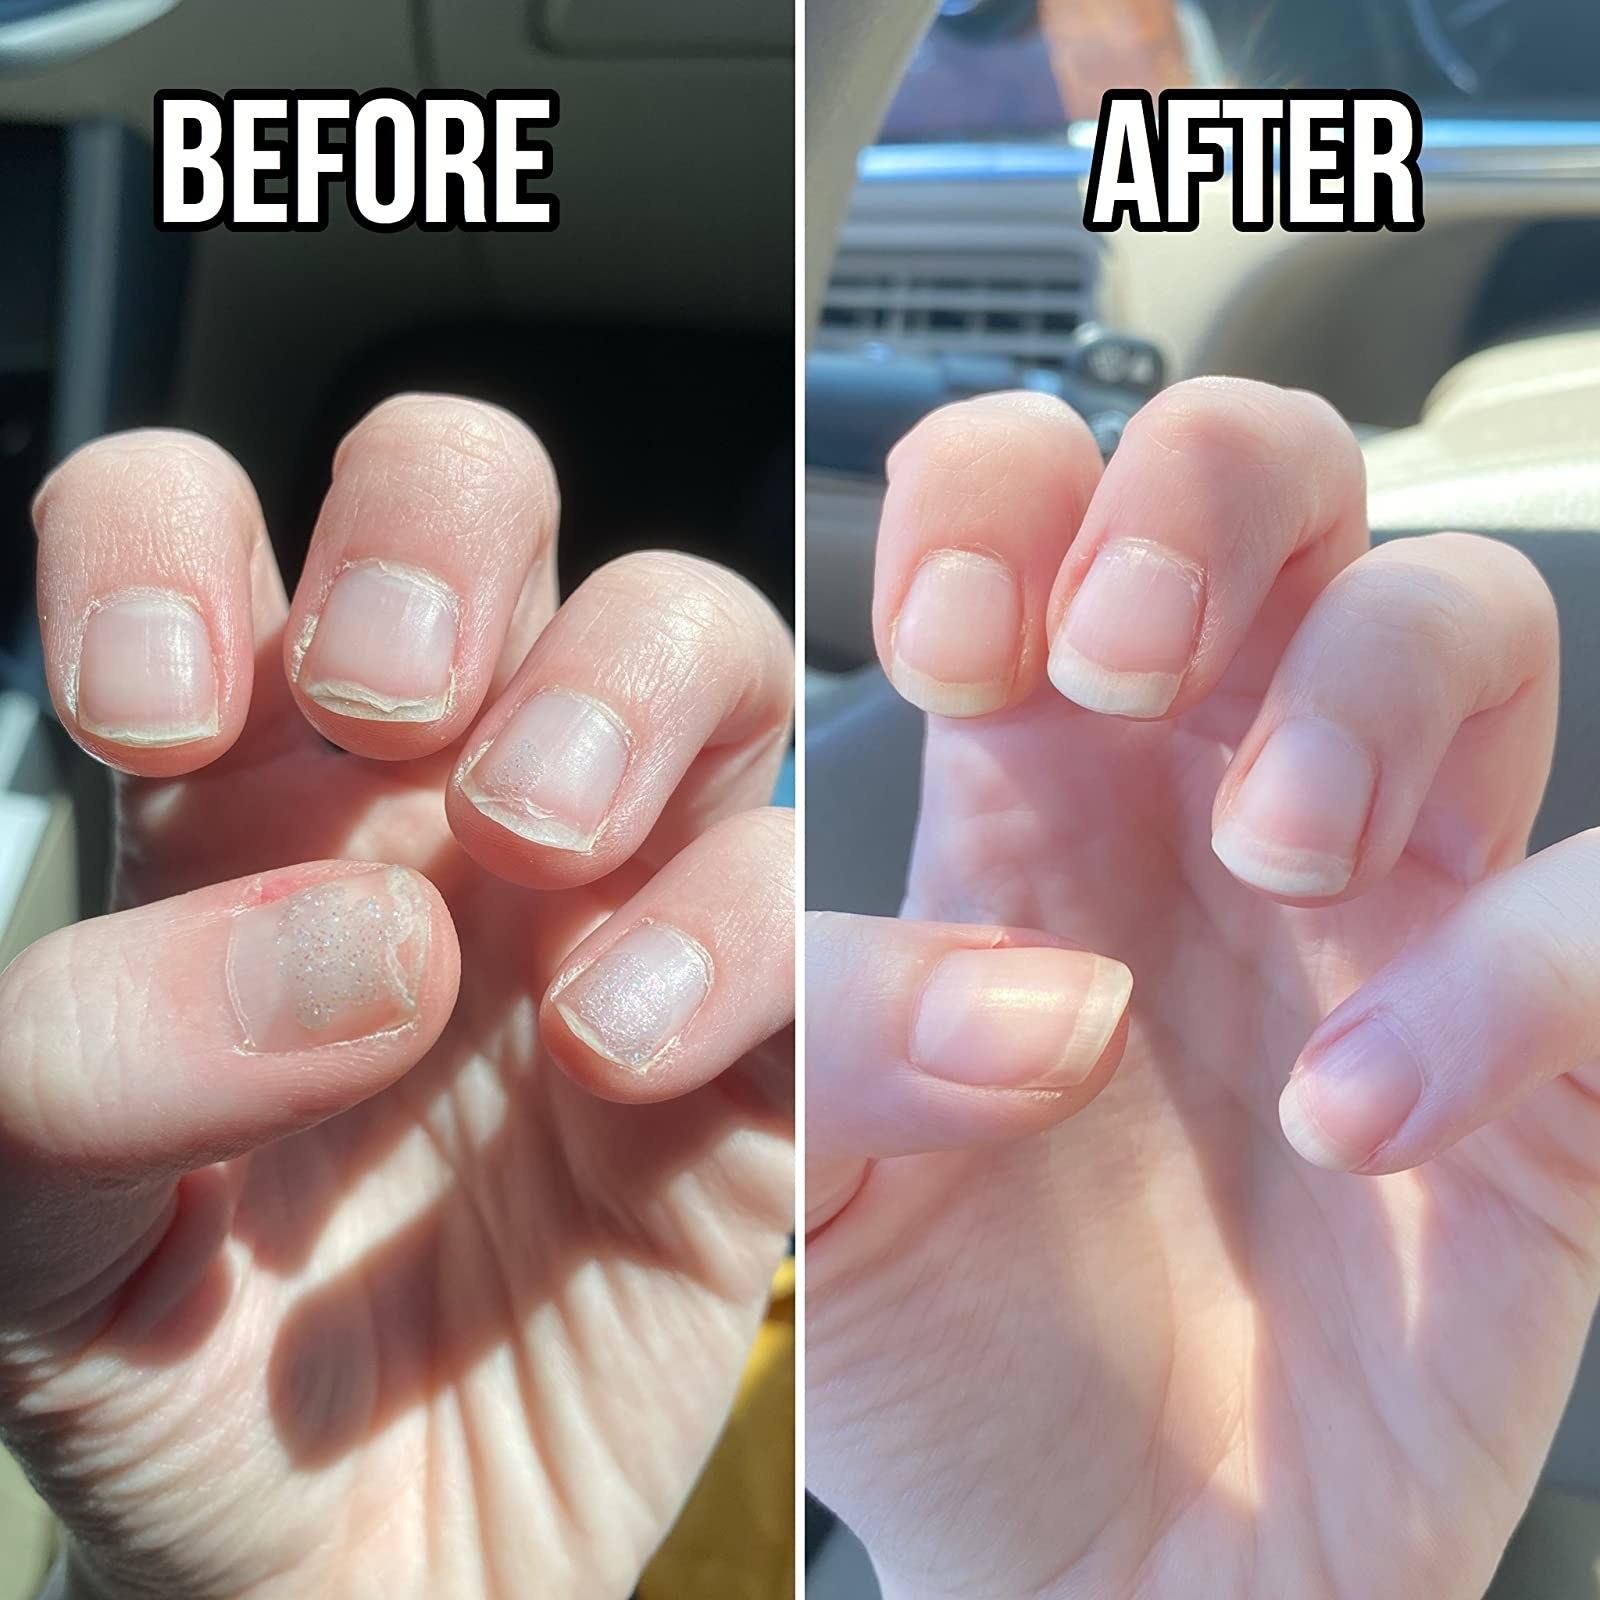 A reviewer&#x27;s peeling nails on the left, the same hand with strong, non peeling or breaking nails on the right